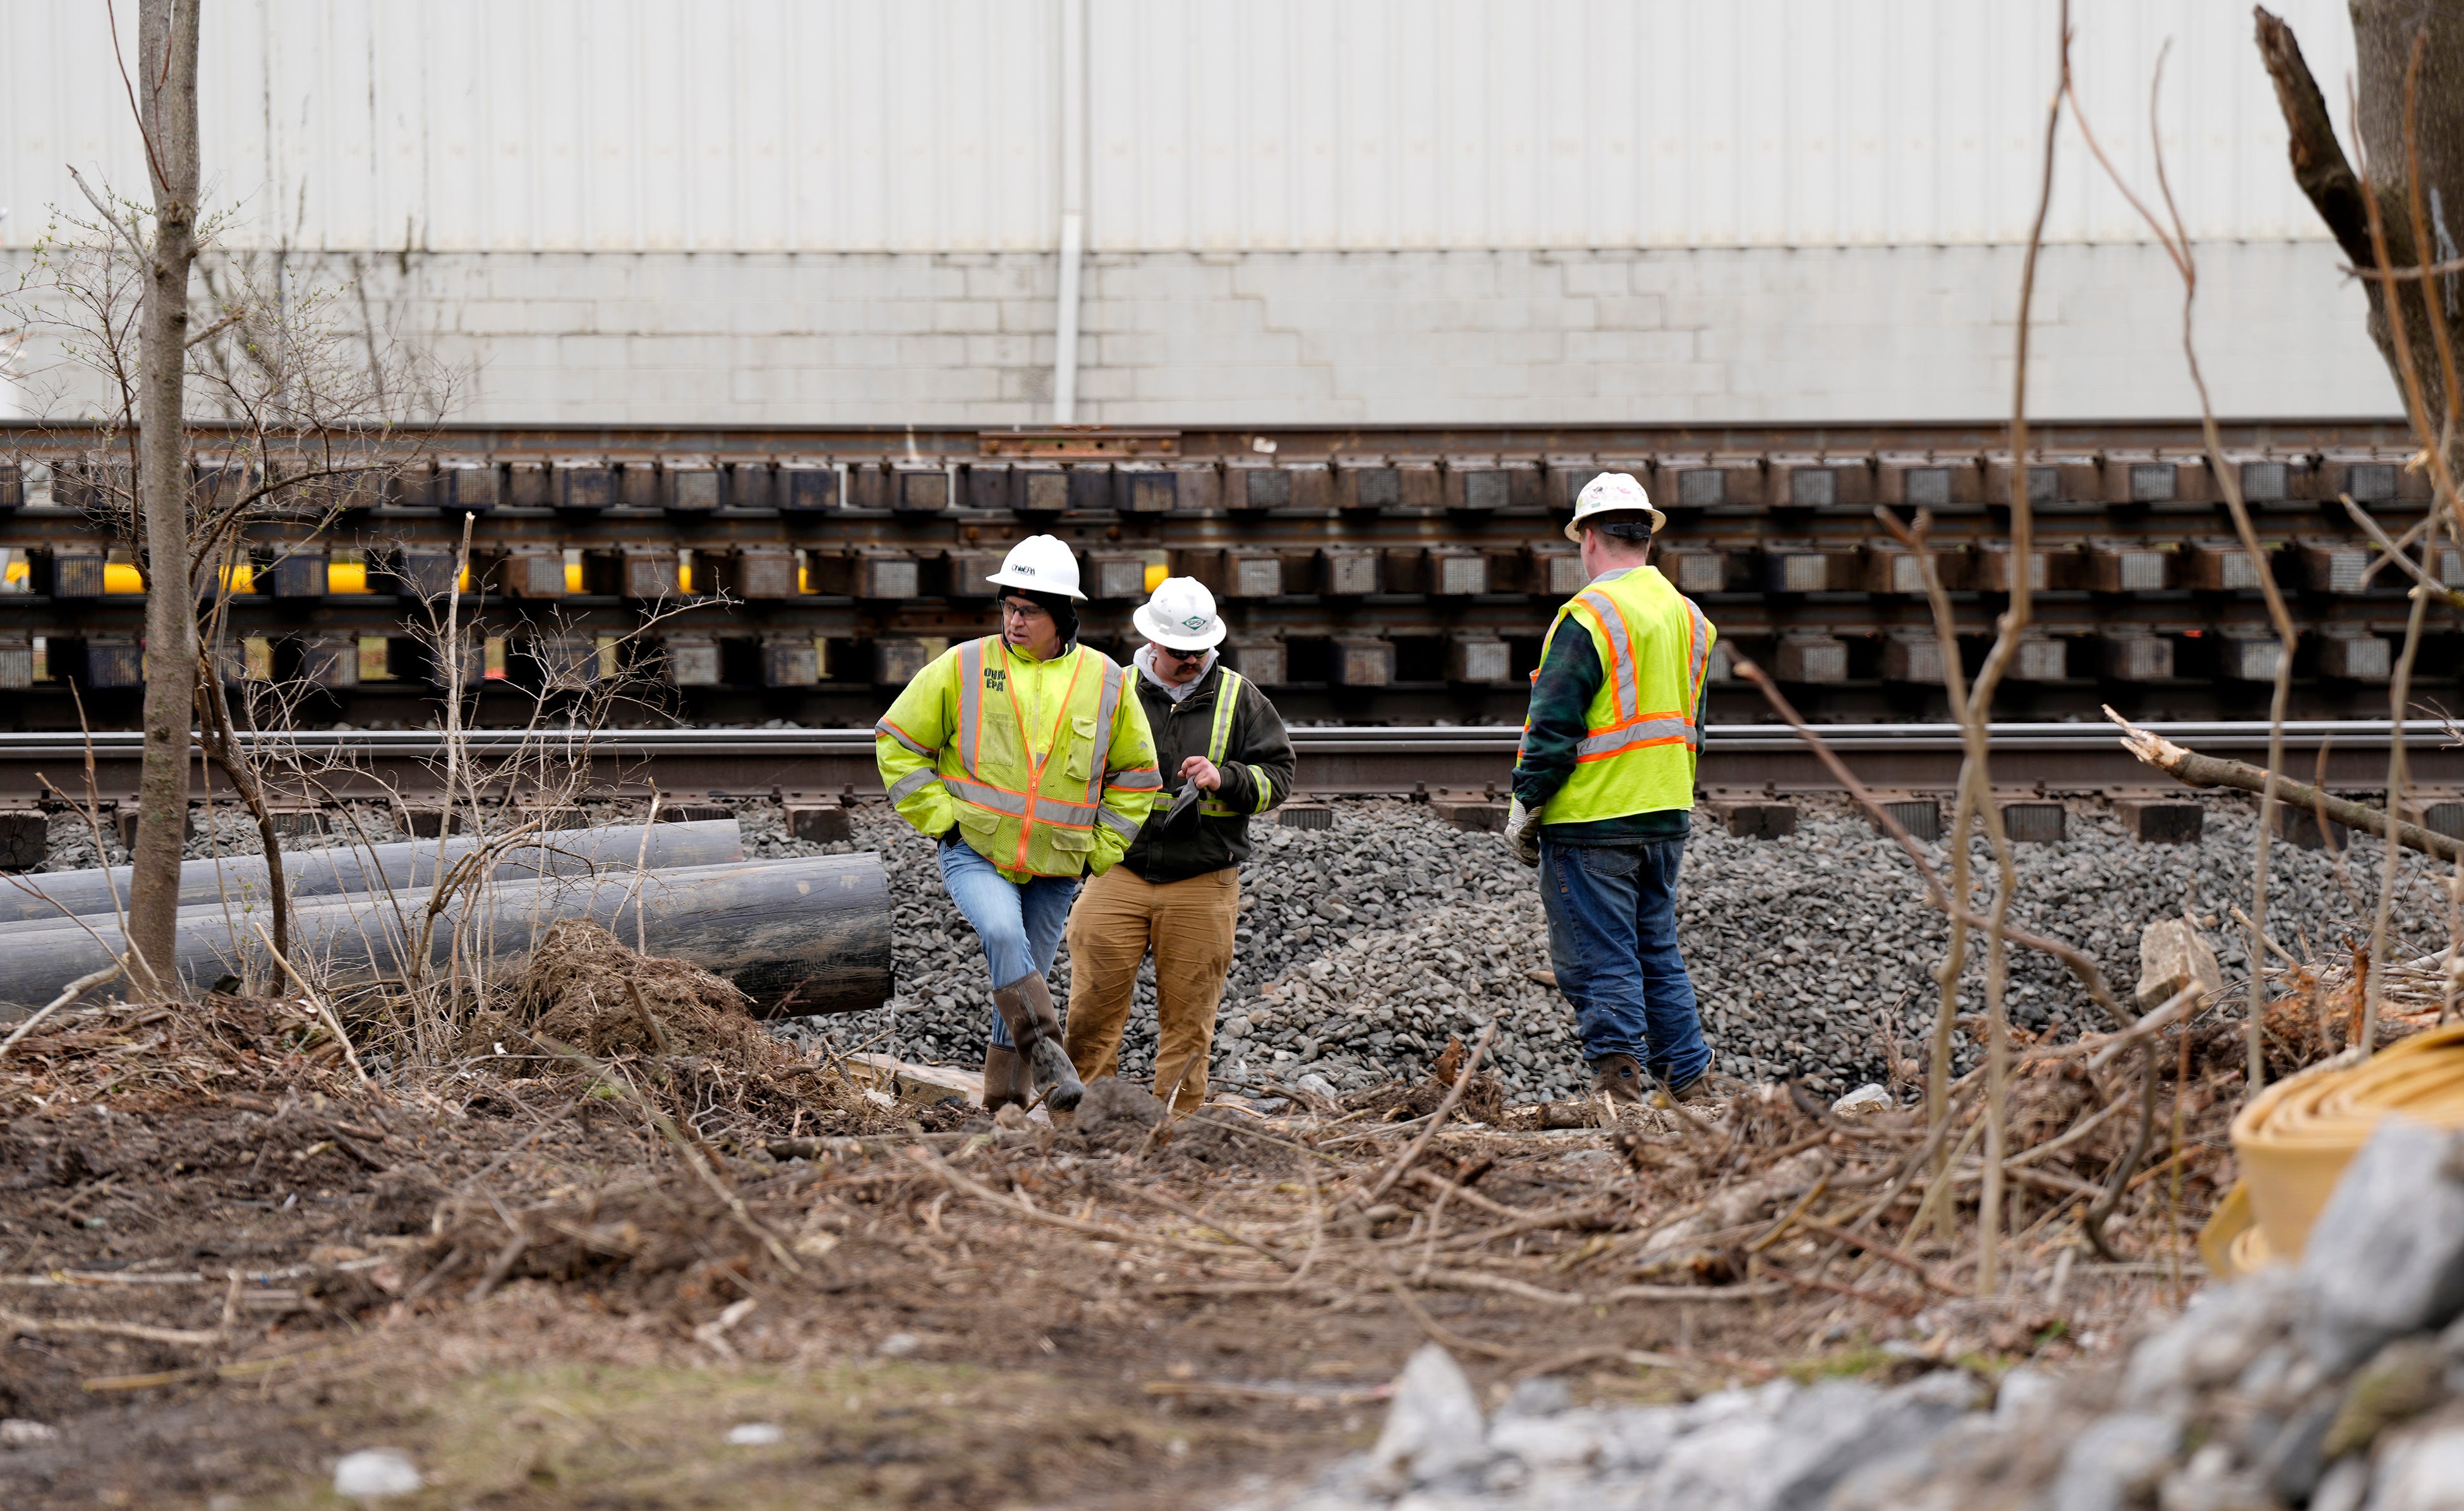 Crews work walk near the railroad track in East Palestine Wednesday, March 22, 2023, after a train derailed February 3. An overheated wheel bearing caused the dangerous derailment that spilled more than 100,000 gallons of toxic chemicals into the air and a fire burst into flames that night. The EPA says it could take up to three months to clean up. 